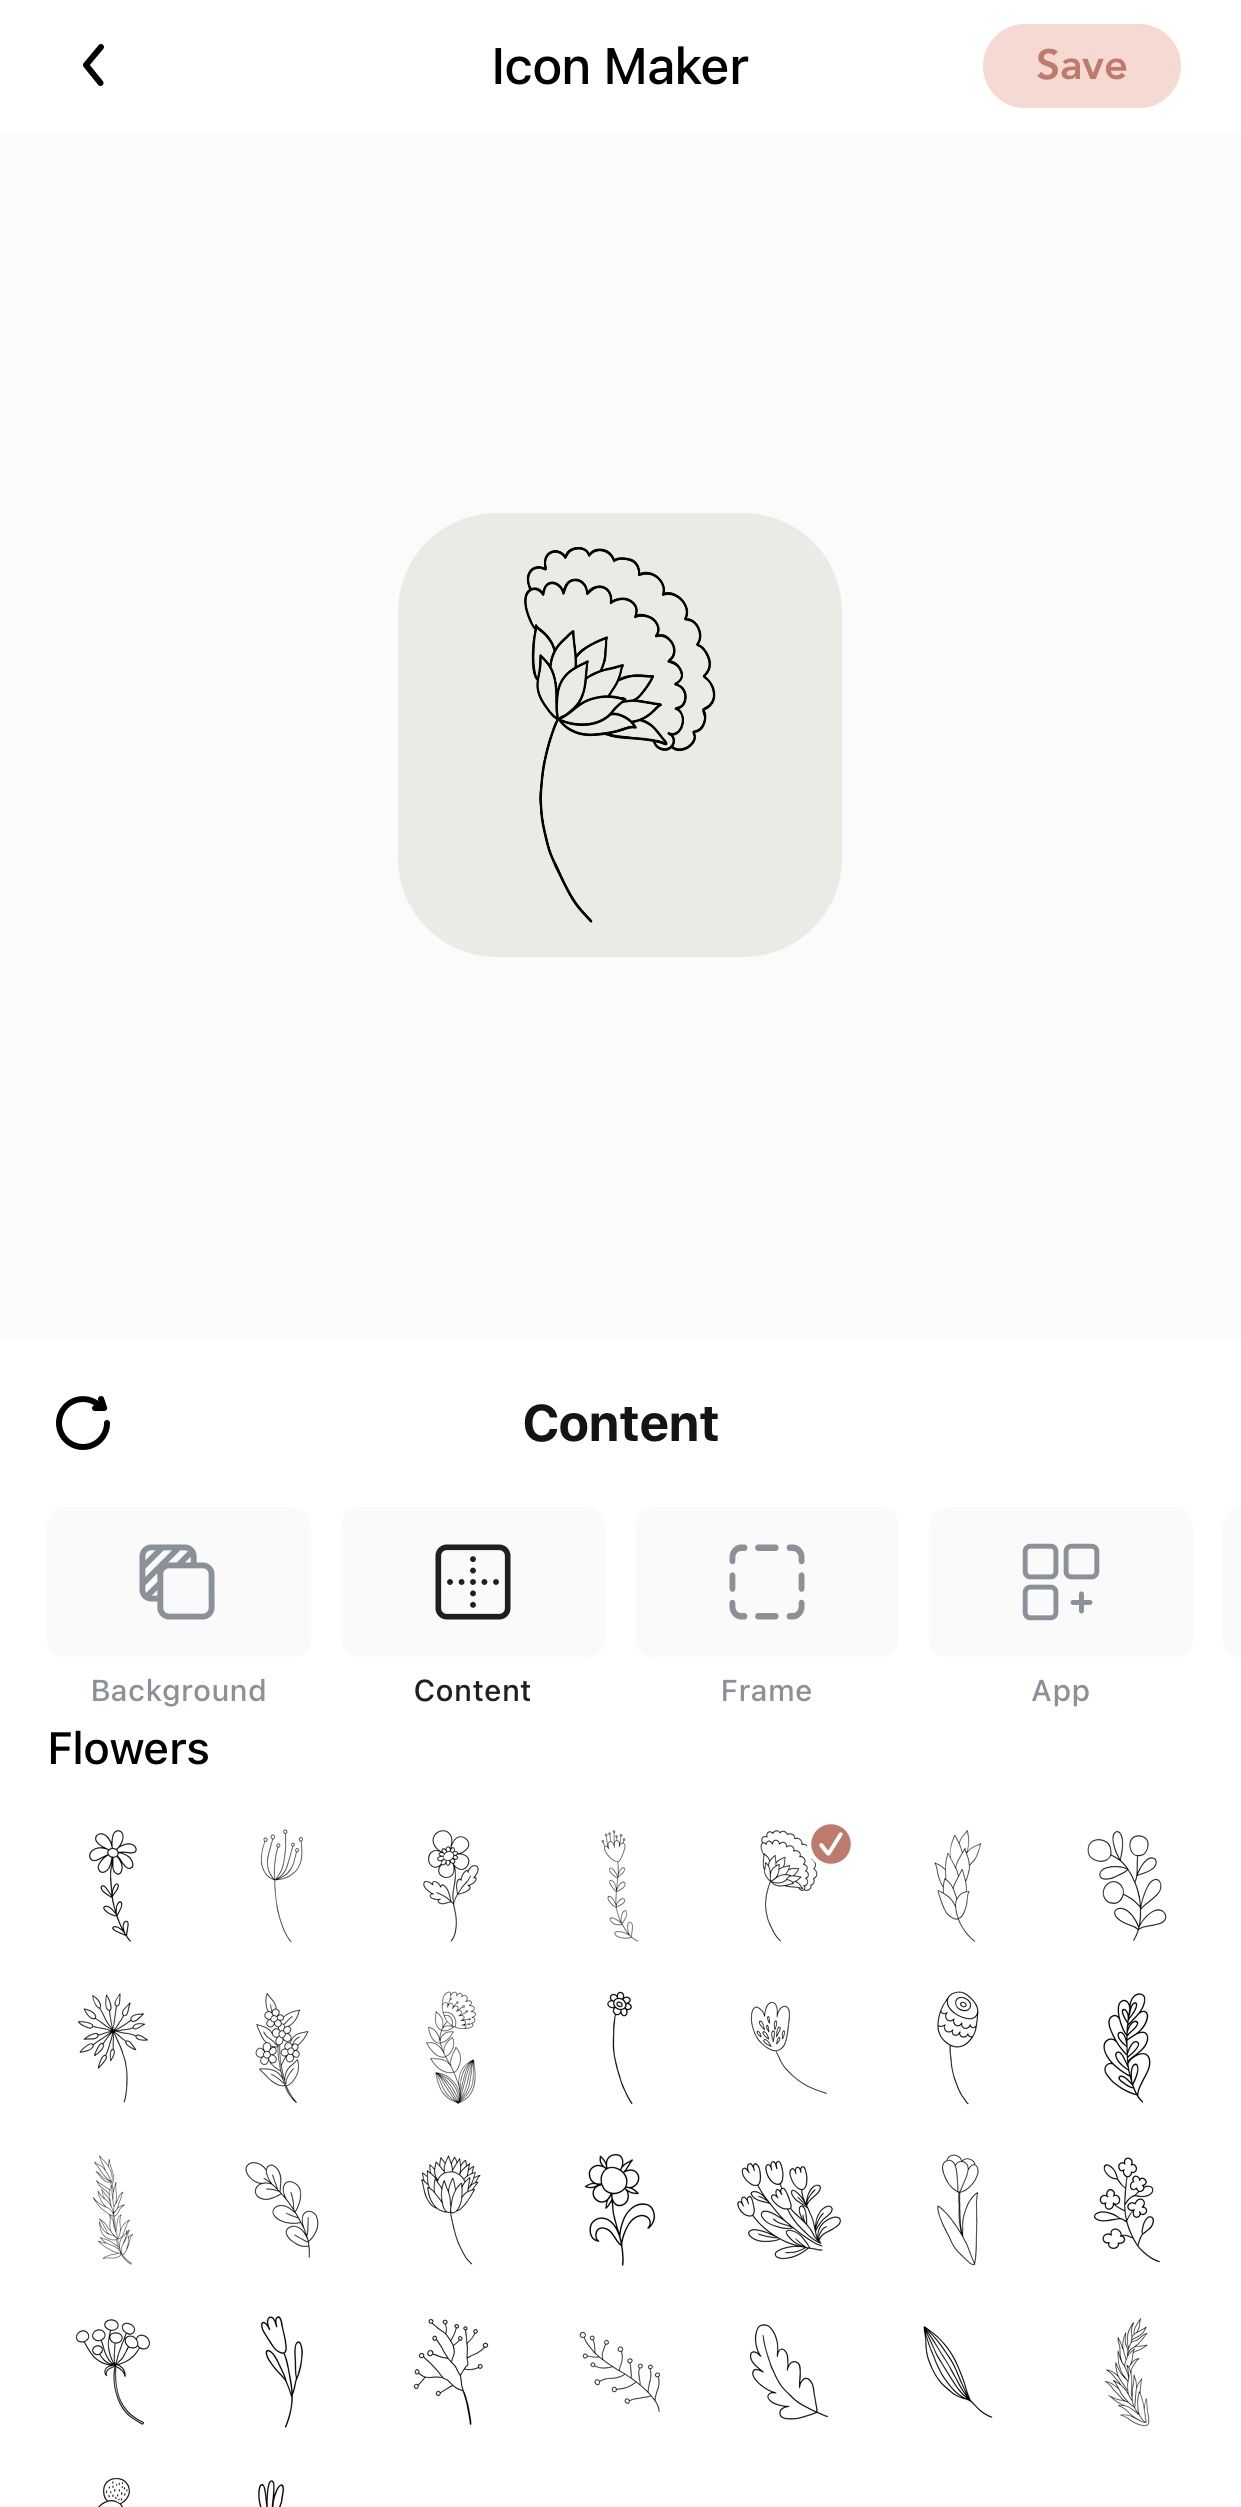 Line art icon of a flower against grey background, and various other flowers icons